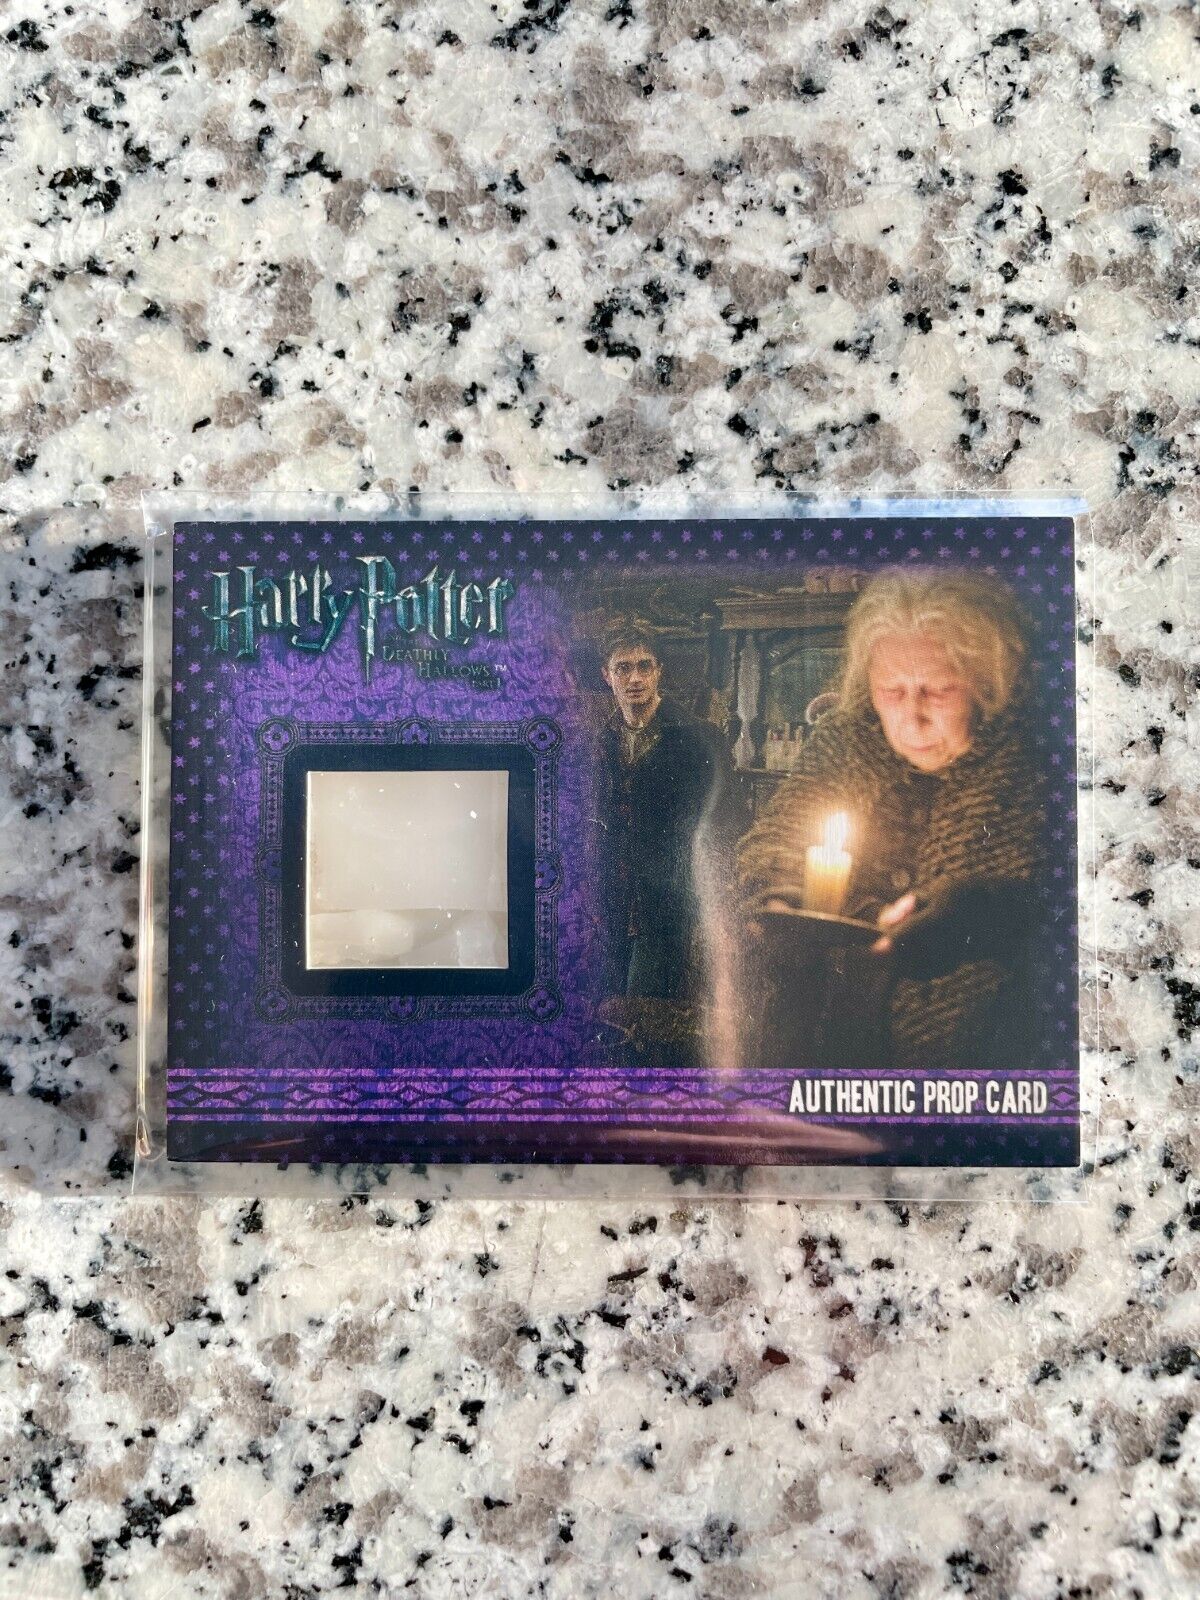 Harry Potter - Deathly Hallows - Candles from Bathilda Bagshot\'s House Prop Card